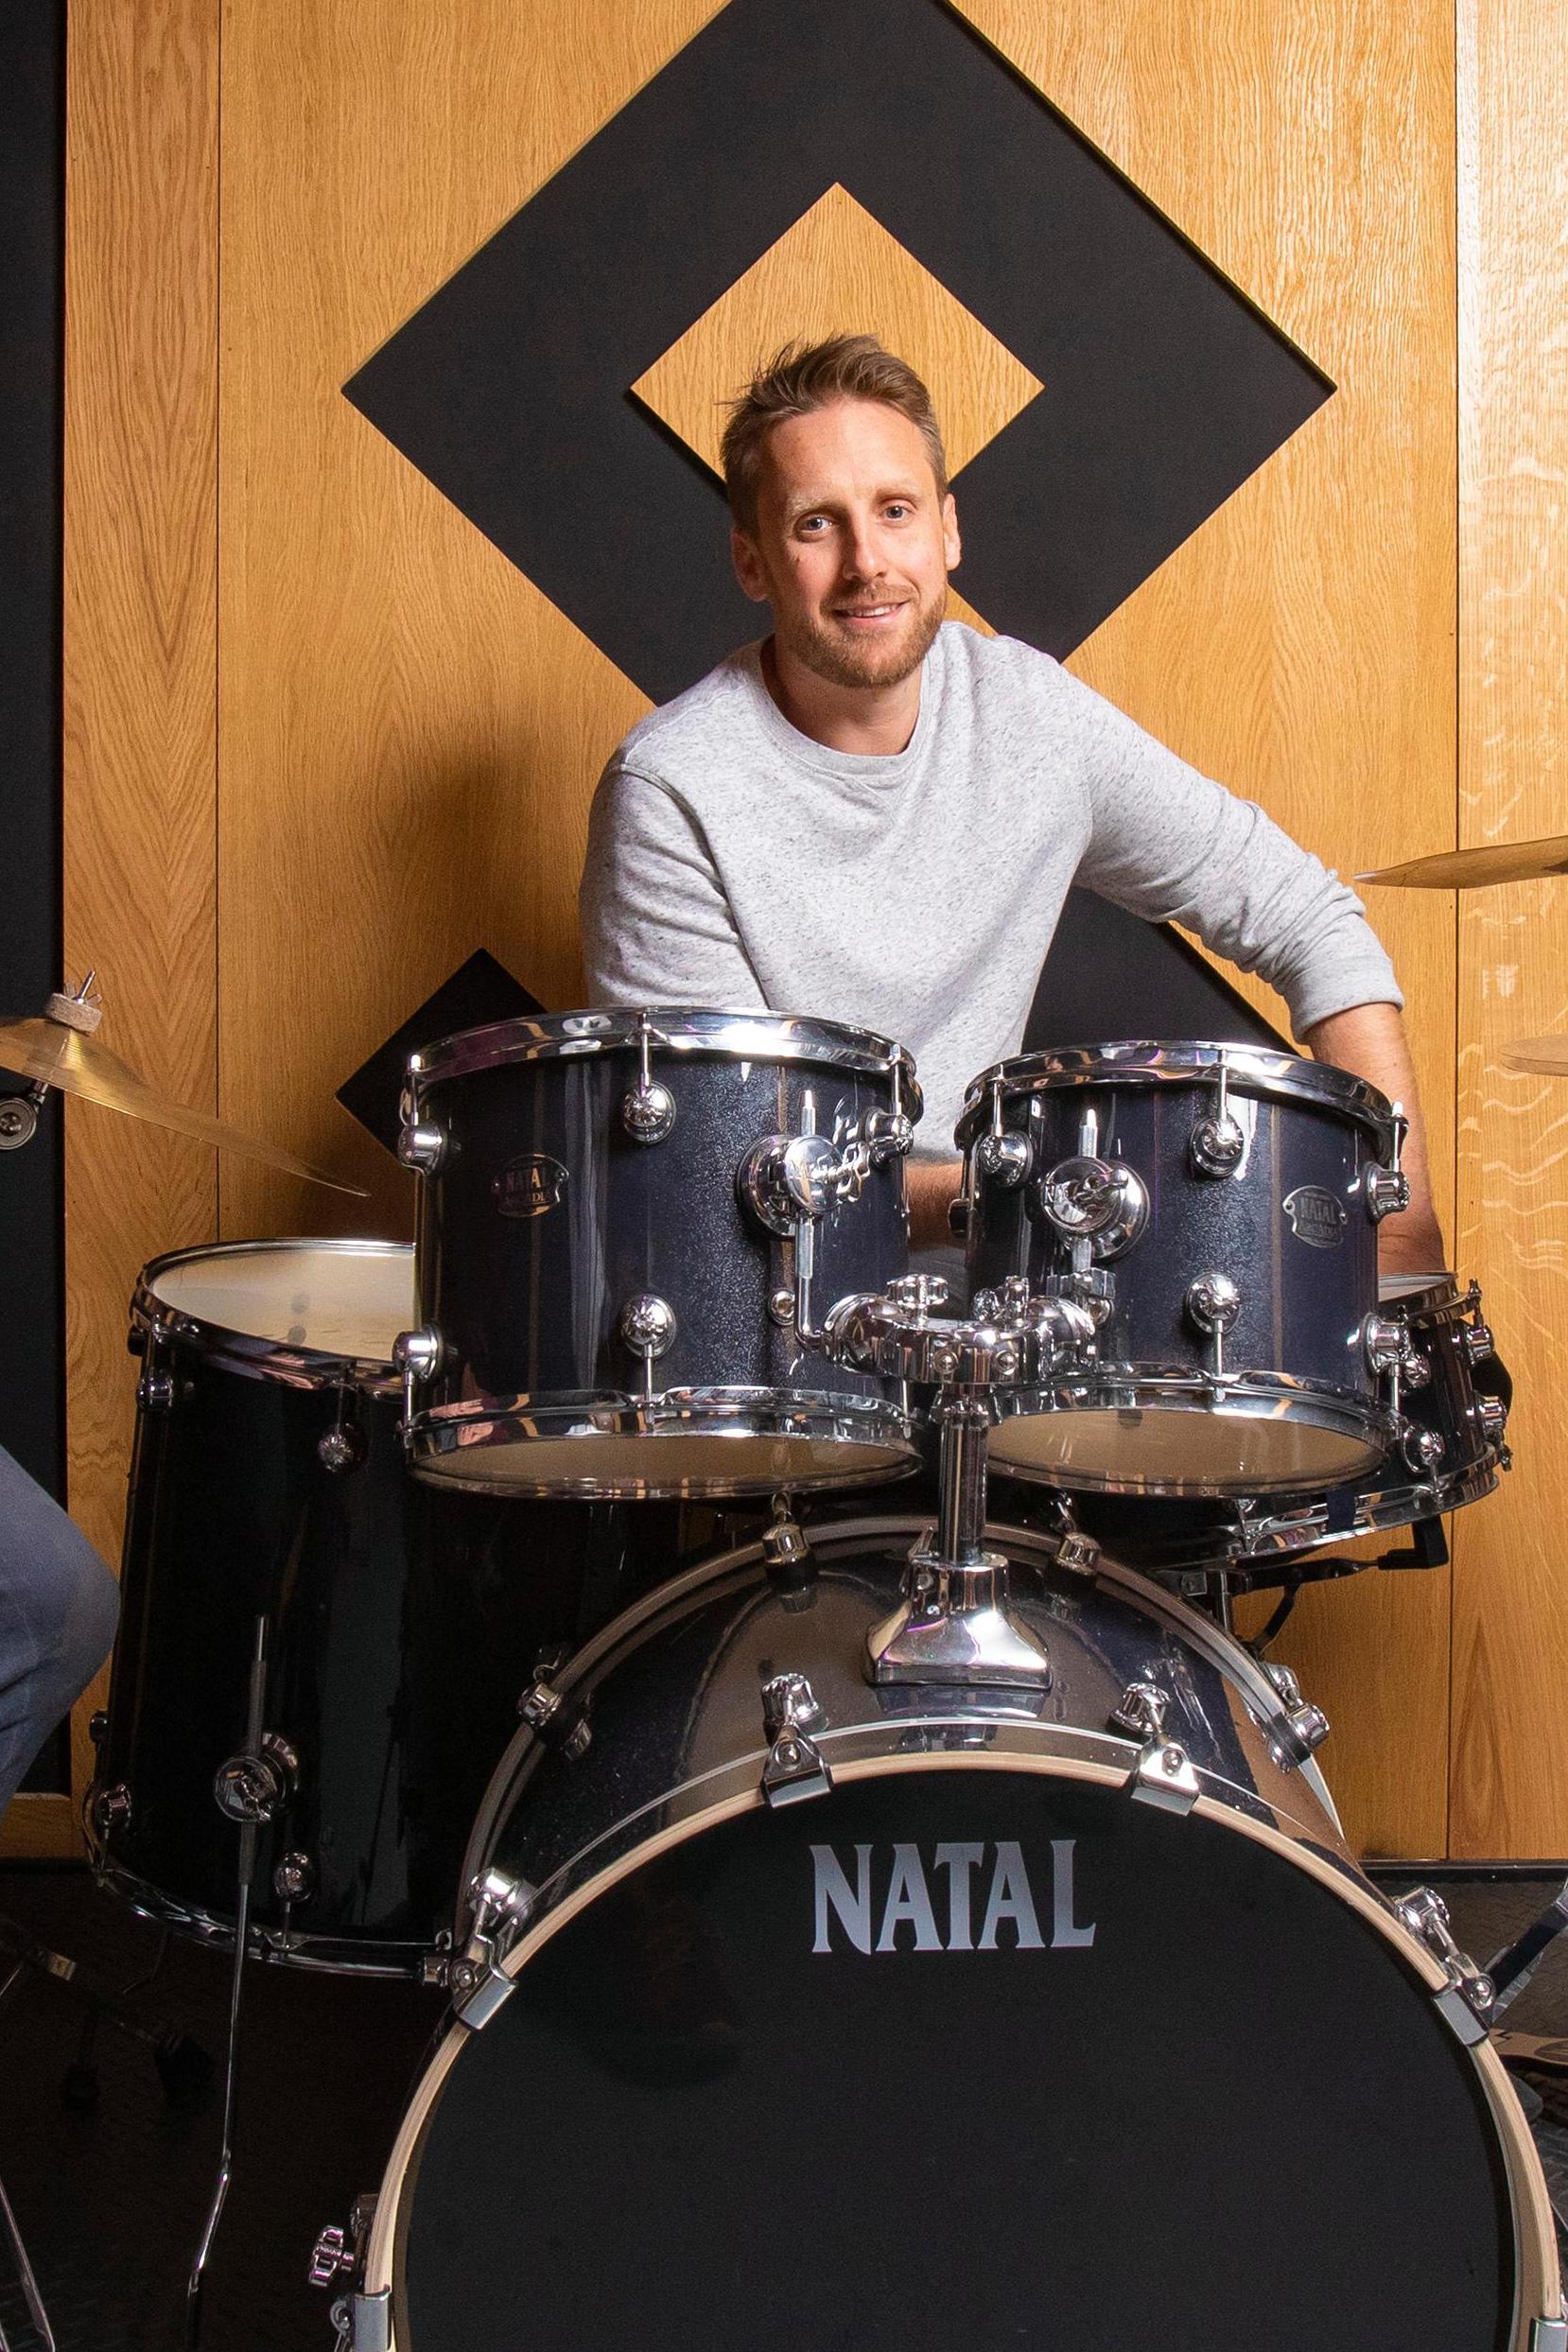 Pirate Studio's David Borrie sitting on a drum stool in front of a Natal drumkit